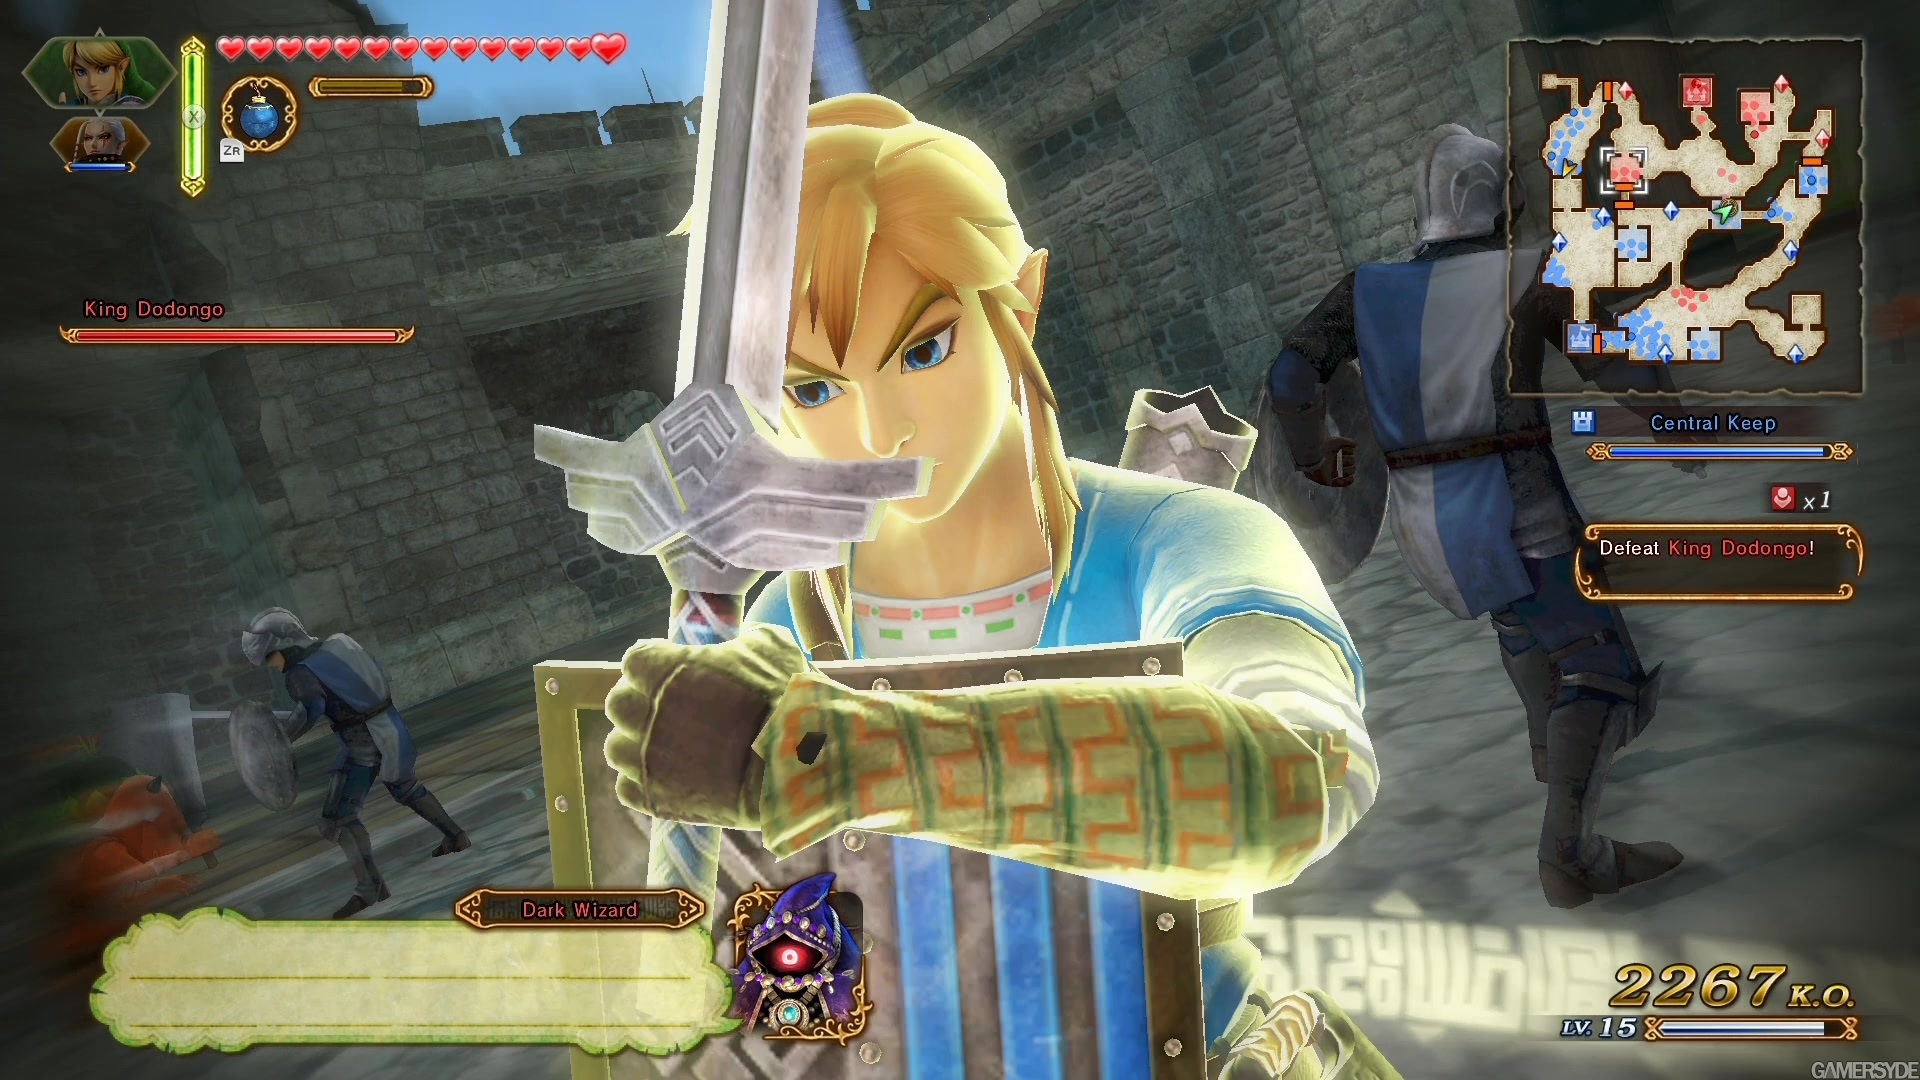 Switch file sizes: Hyrule Warriors: Definitive Edition and more